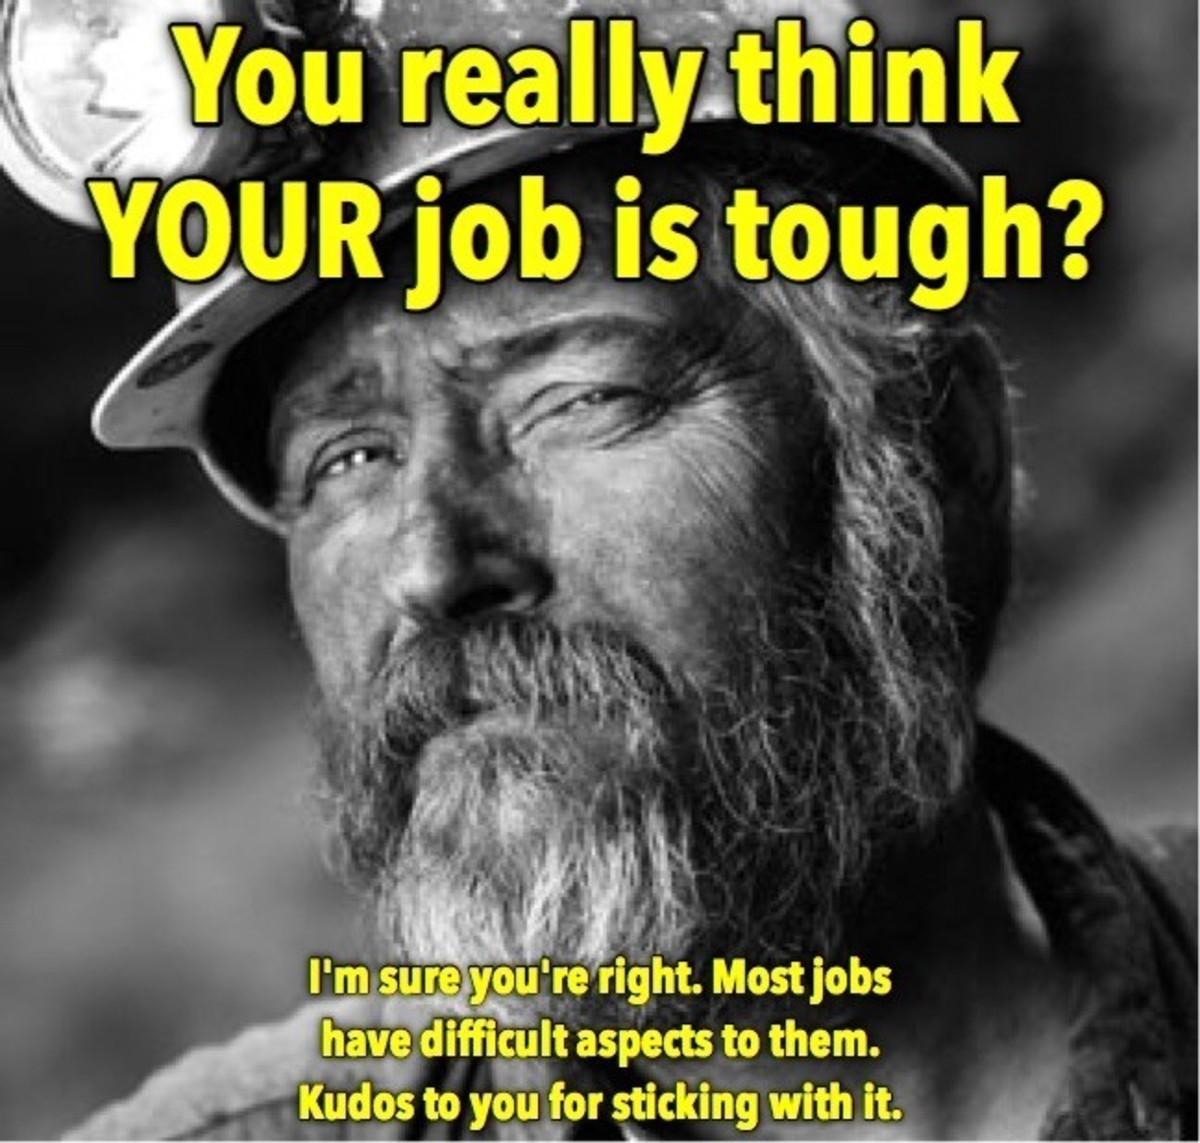 coal miner - _You really think Your job is tough? I'm sure you're right. Most jobs have difficult aspects to them. Kudos to you for sticking with it.